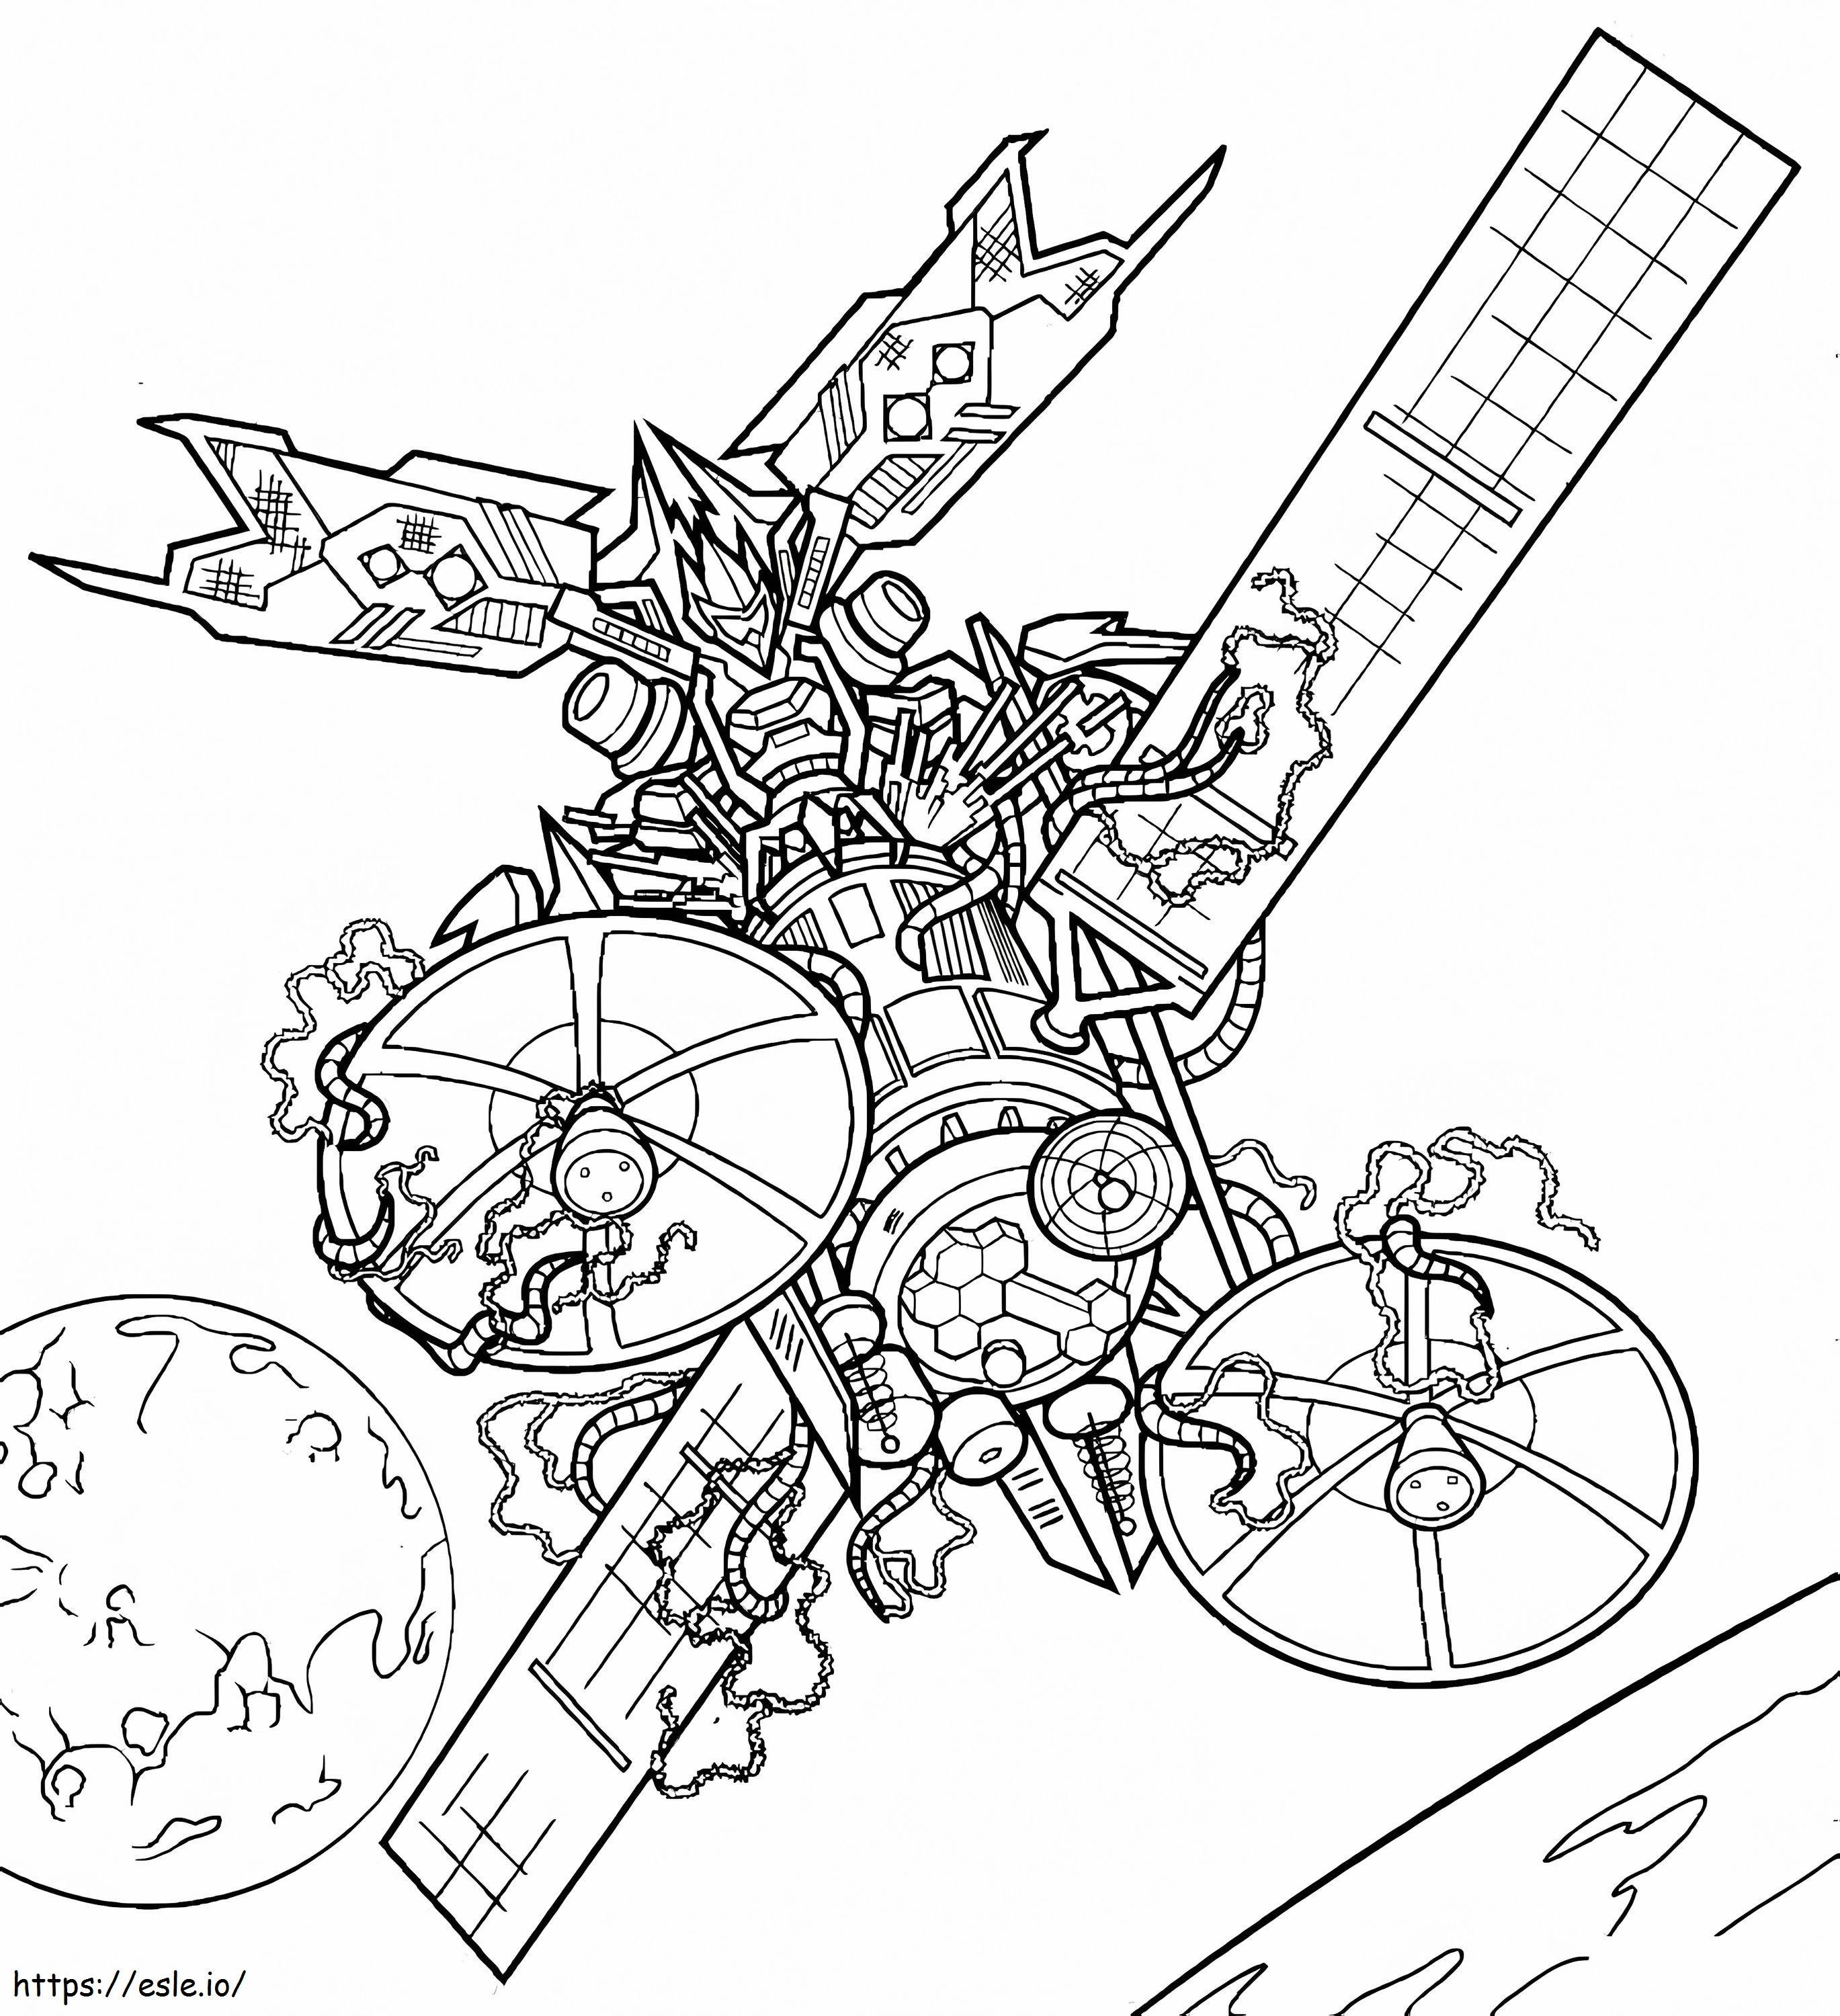 Megatron Coming To Earth coloring page